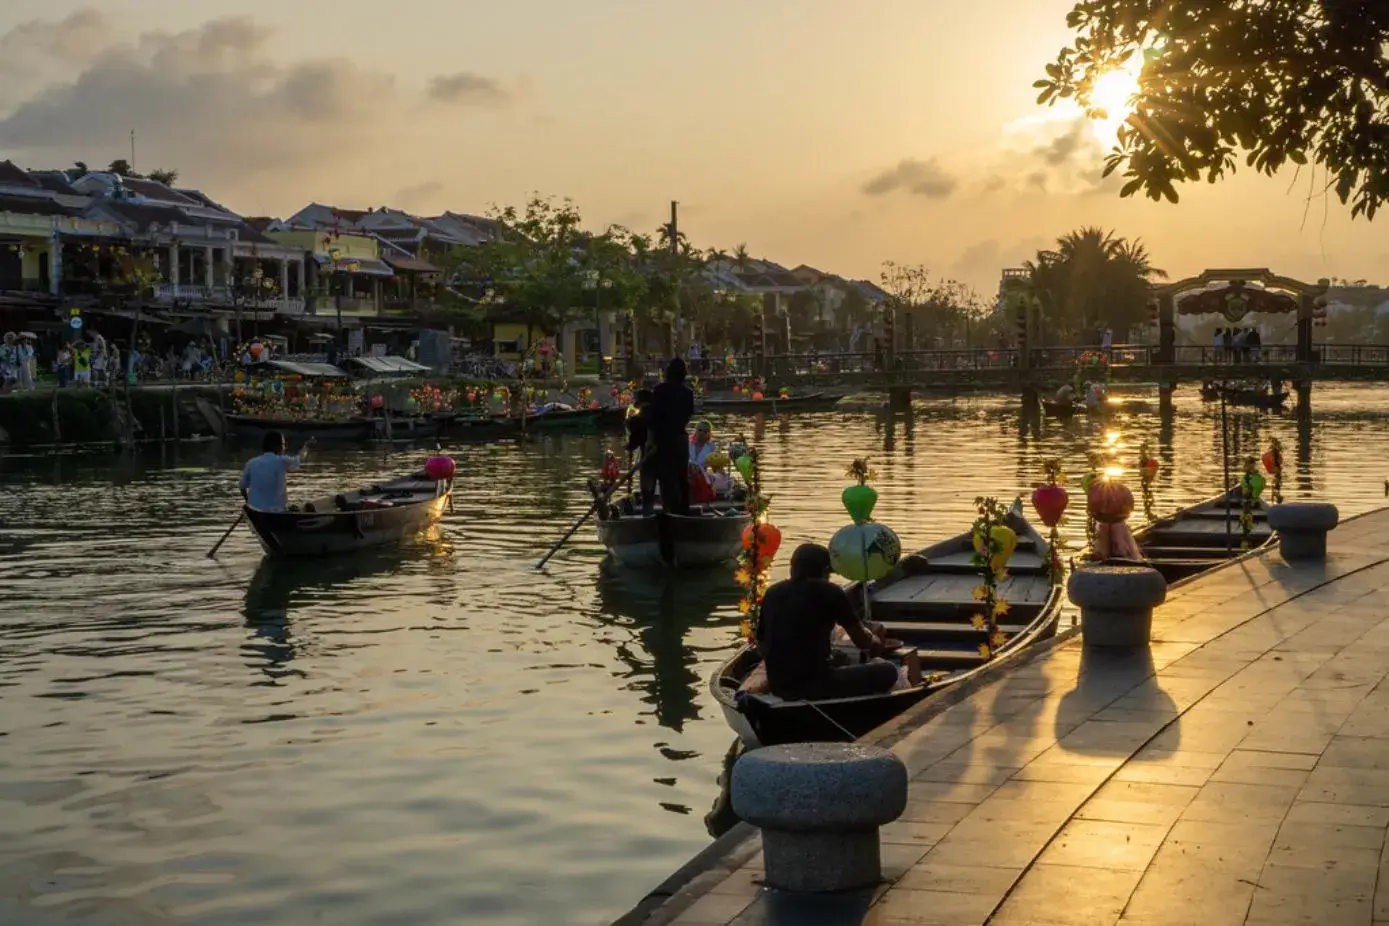 Hoi An - 11 Best Places to Visit in Vietnam